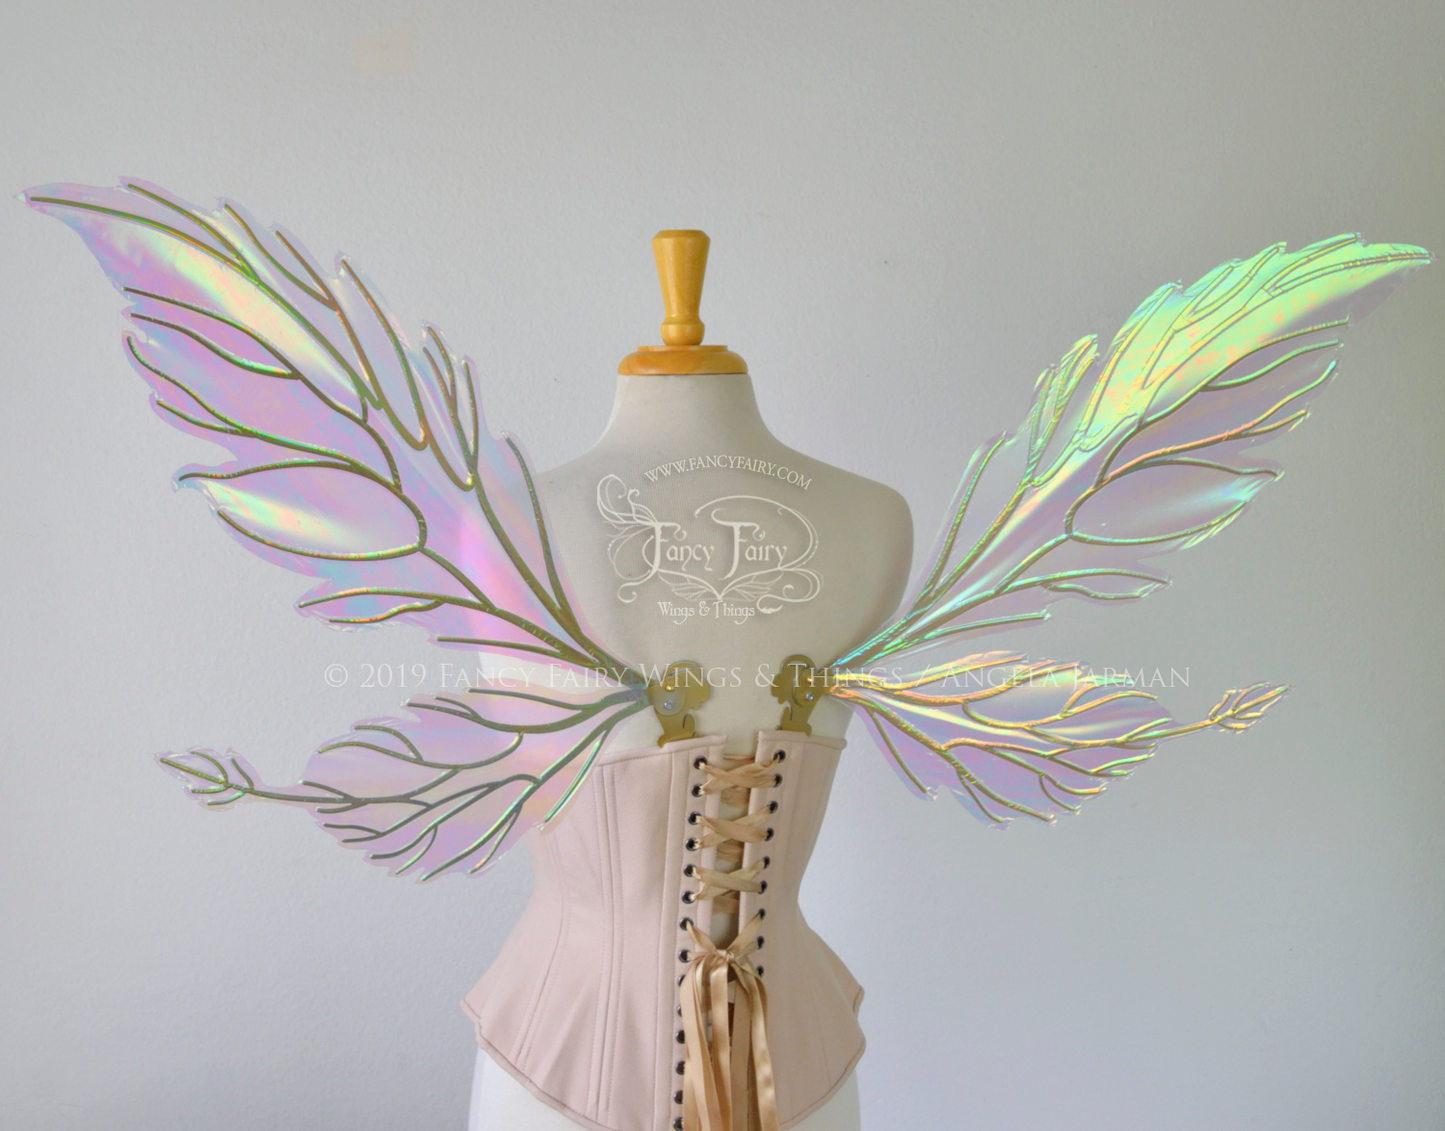 Ivy Iridescent Convertible Fairy Wings in Satin White with Candy Gold veins